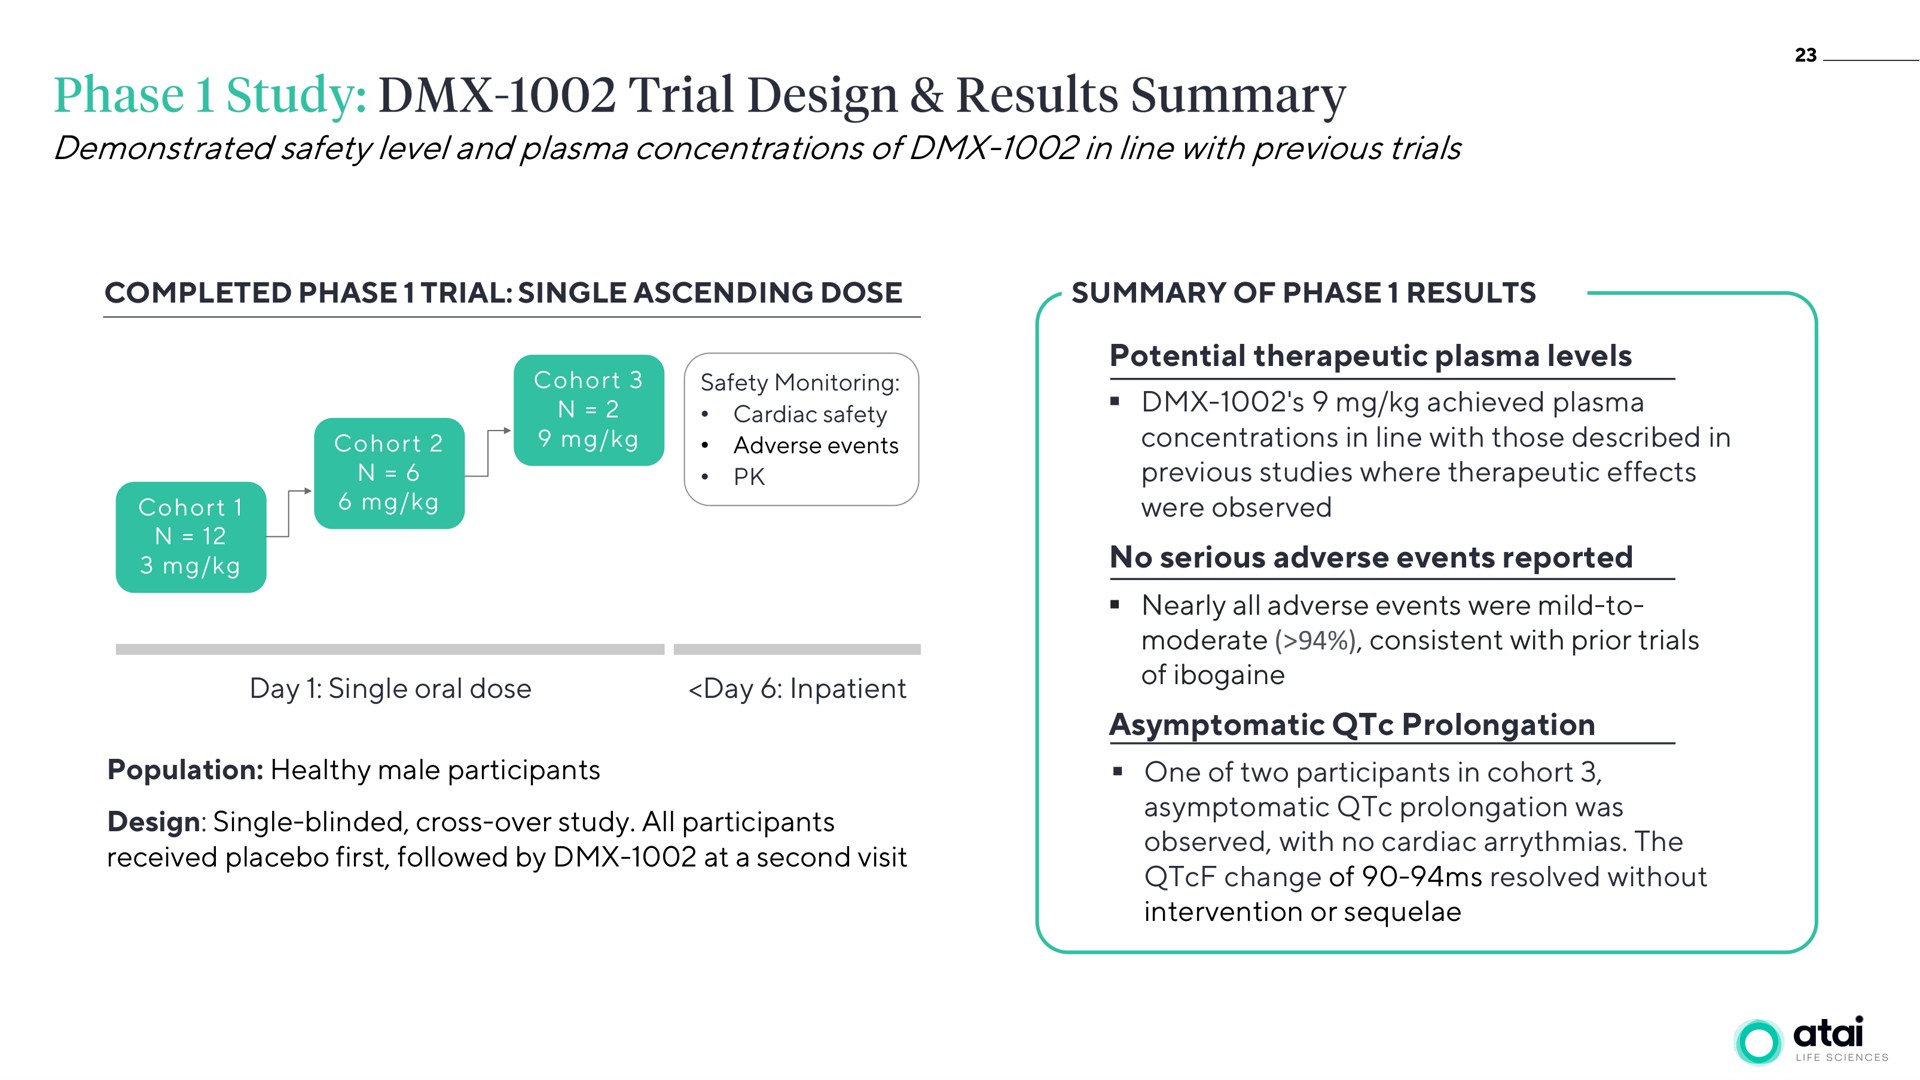 demonstrated safety level and plasma concentrations of in line with previous trials potential therapeutic plasma levels no serious adverse events reported asymptomatic prolongation phase study trial design results summary | ATAI